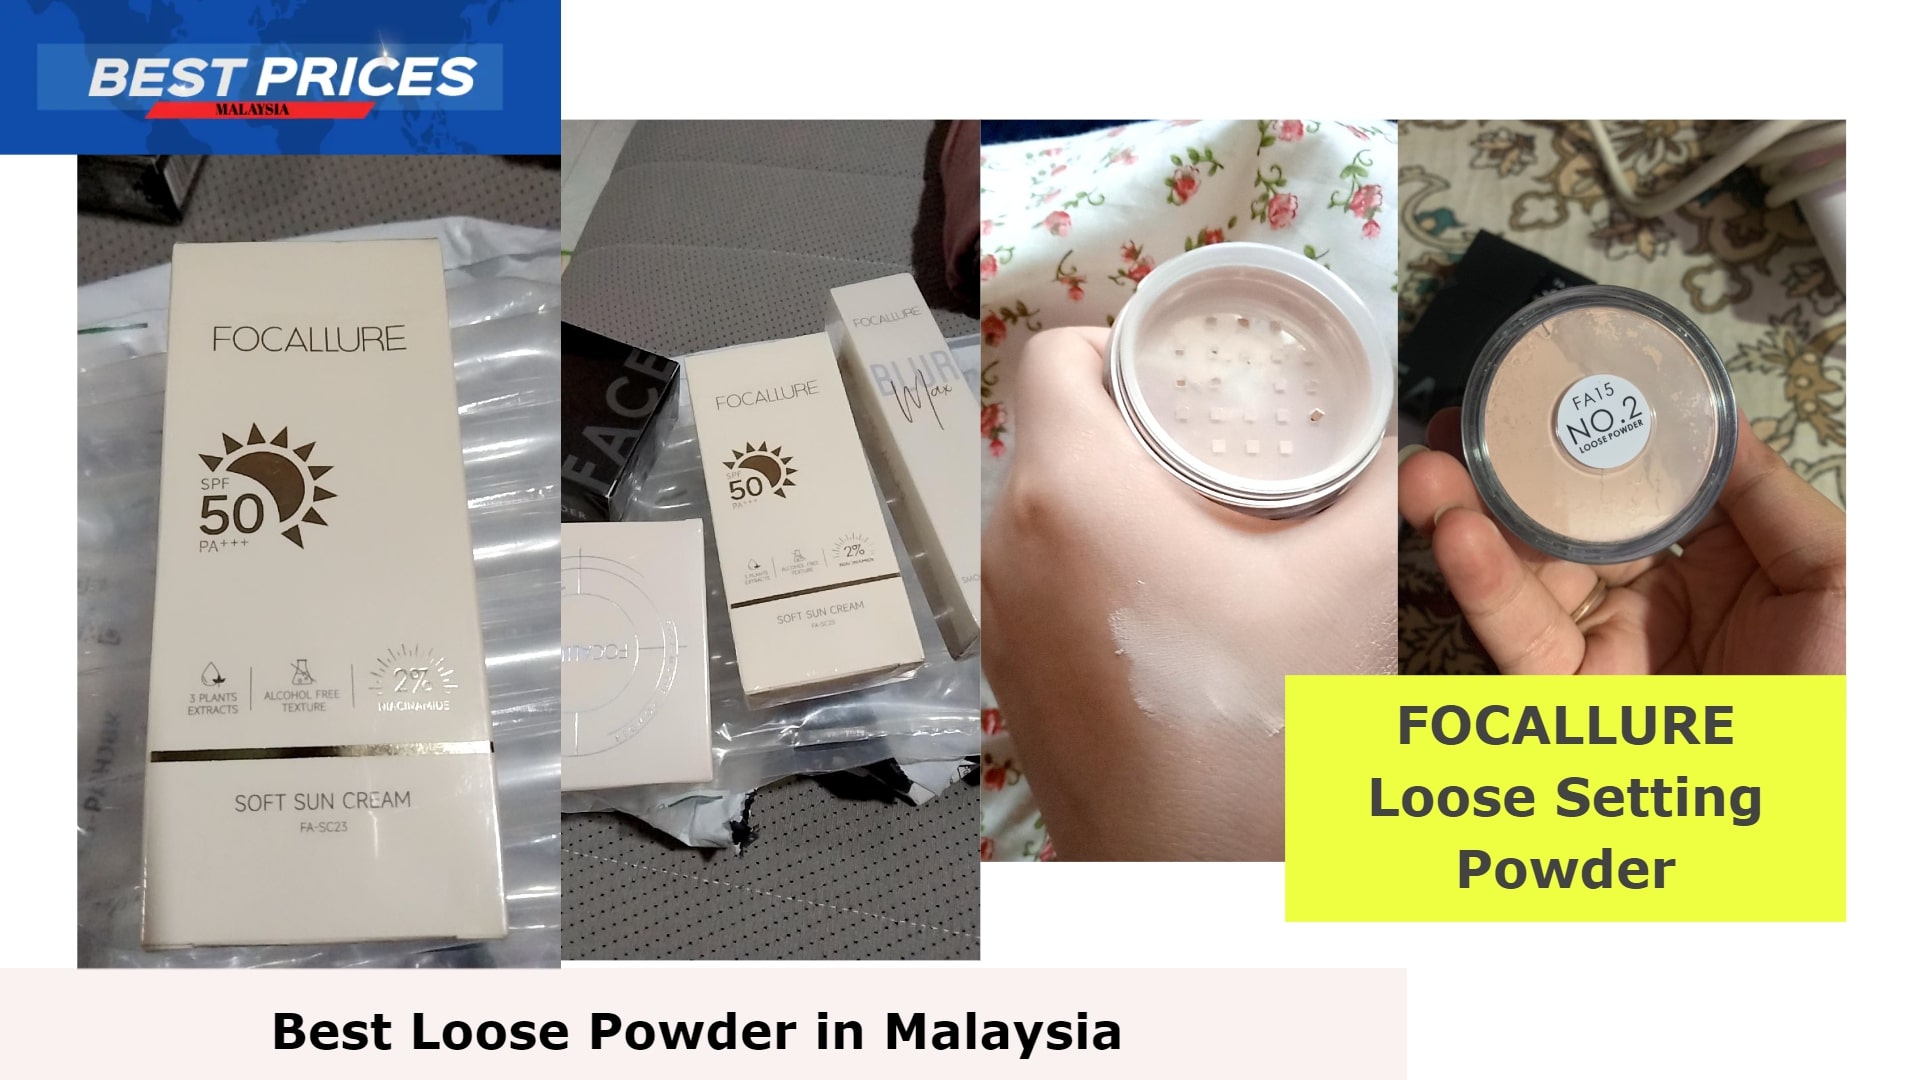 FOCALLURE Loose Setting Powder - Loose Powder Malaysia, Loose Powder Malaysia, loose powder for oily skin, Is Loose powder good for oily skin?, Which powder is best for oily skin?, How do you use loose powder for oily skin?, Does powder help oily face?, Which brand is best for loose powder?, What's the difference between setting powder and loose powder?, Which loose powder is good for daily use?, What is the loose powder for?, Best Loose Powder Malaysia, beauty makeup powder, Best drugstore Loose Powder Malaysia, Best compact powder,